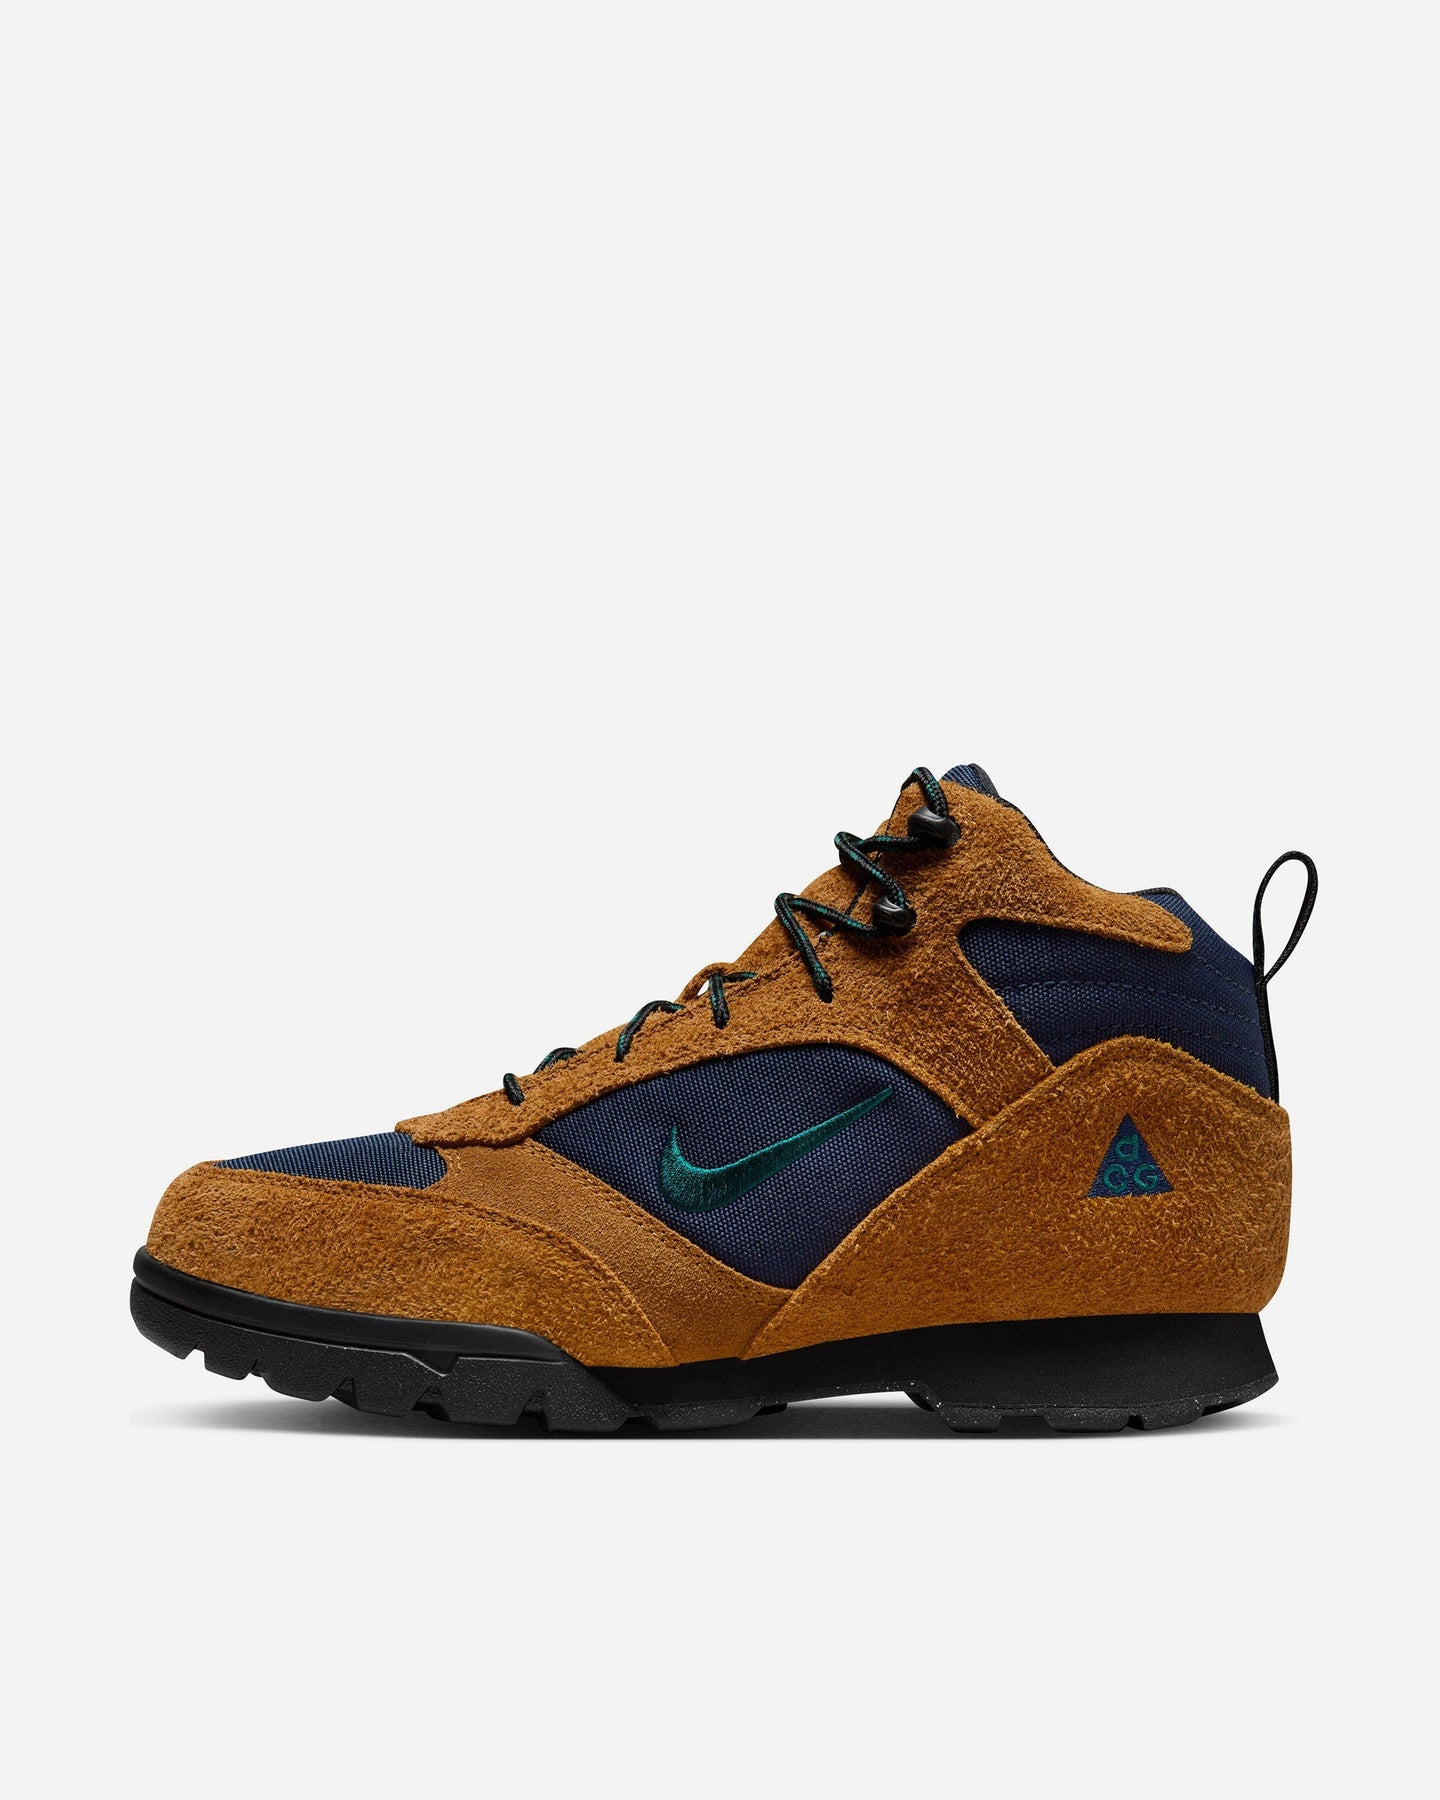 NIKE ACG TORRE MID WP – A+S